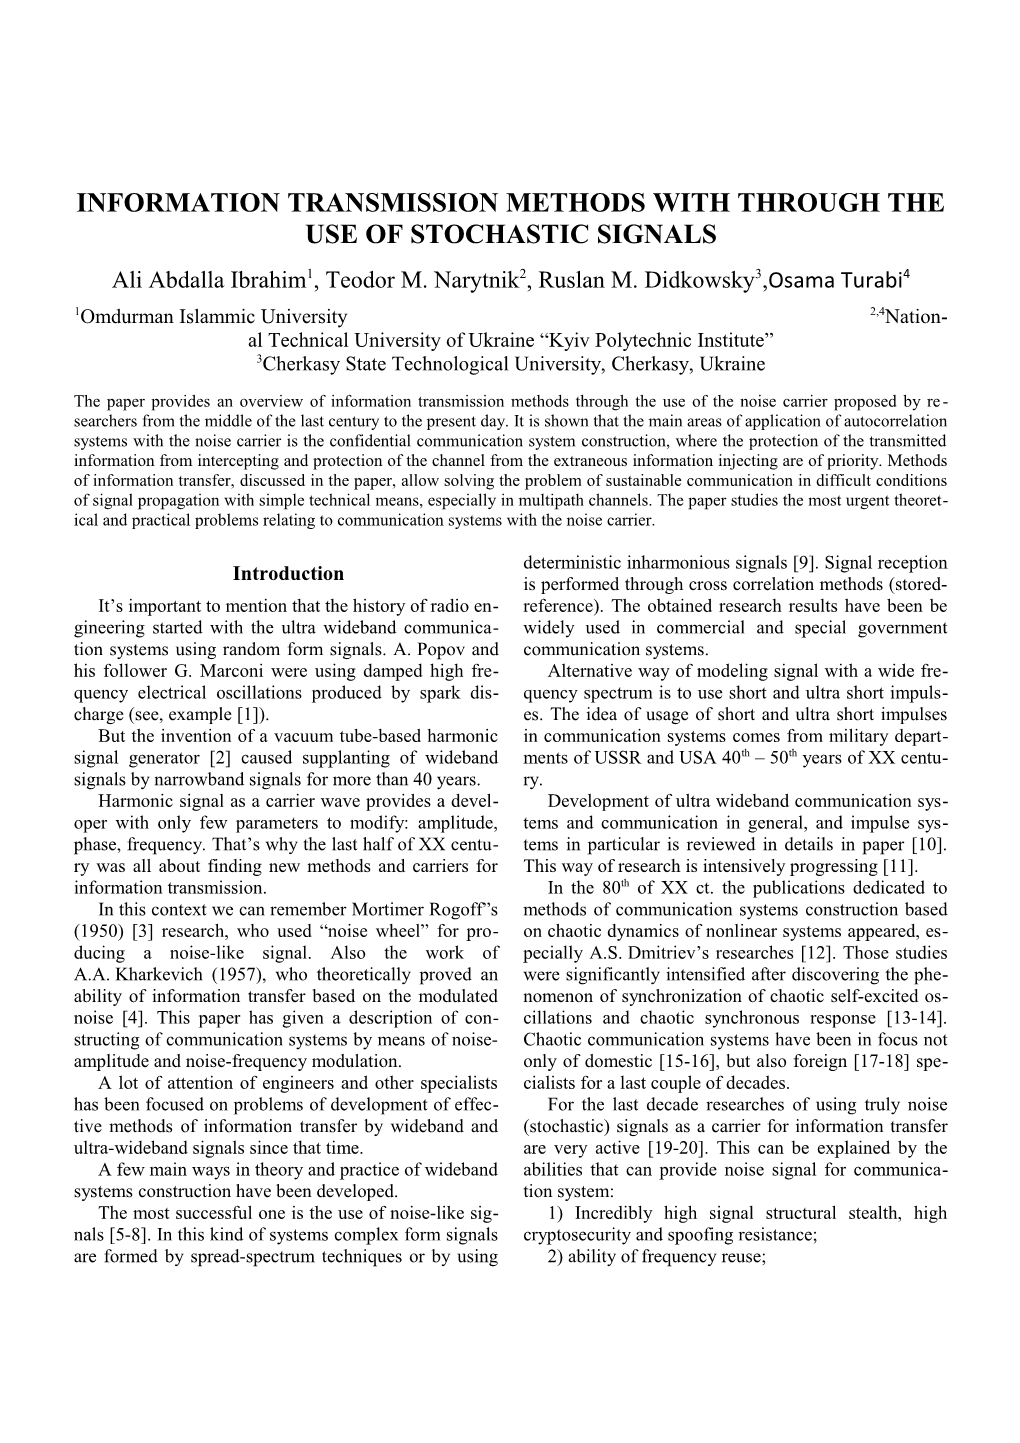 Information Transmission Methods with Through the Use of Stochastic Signals